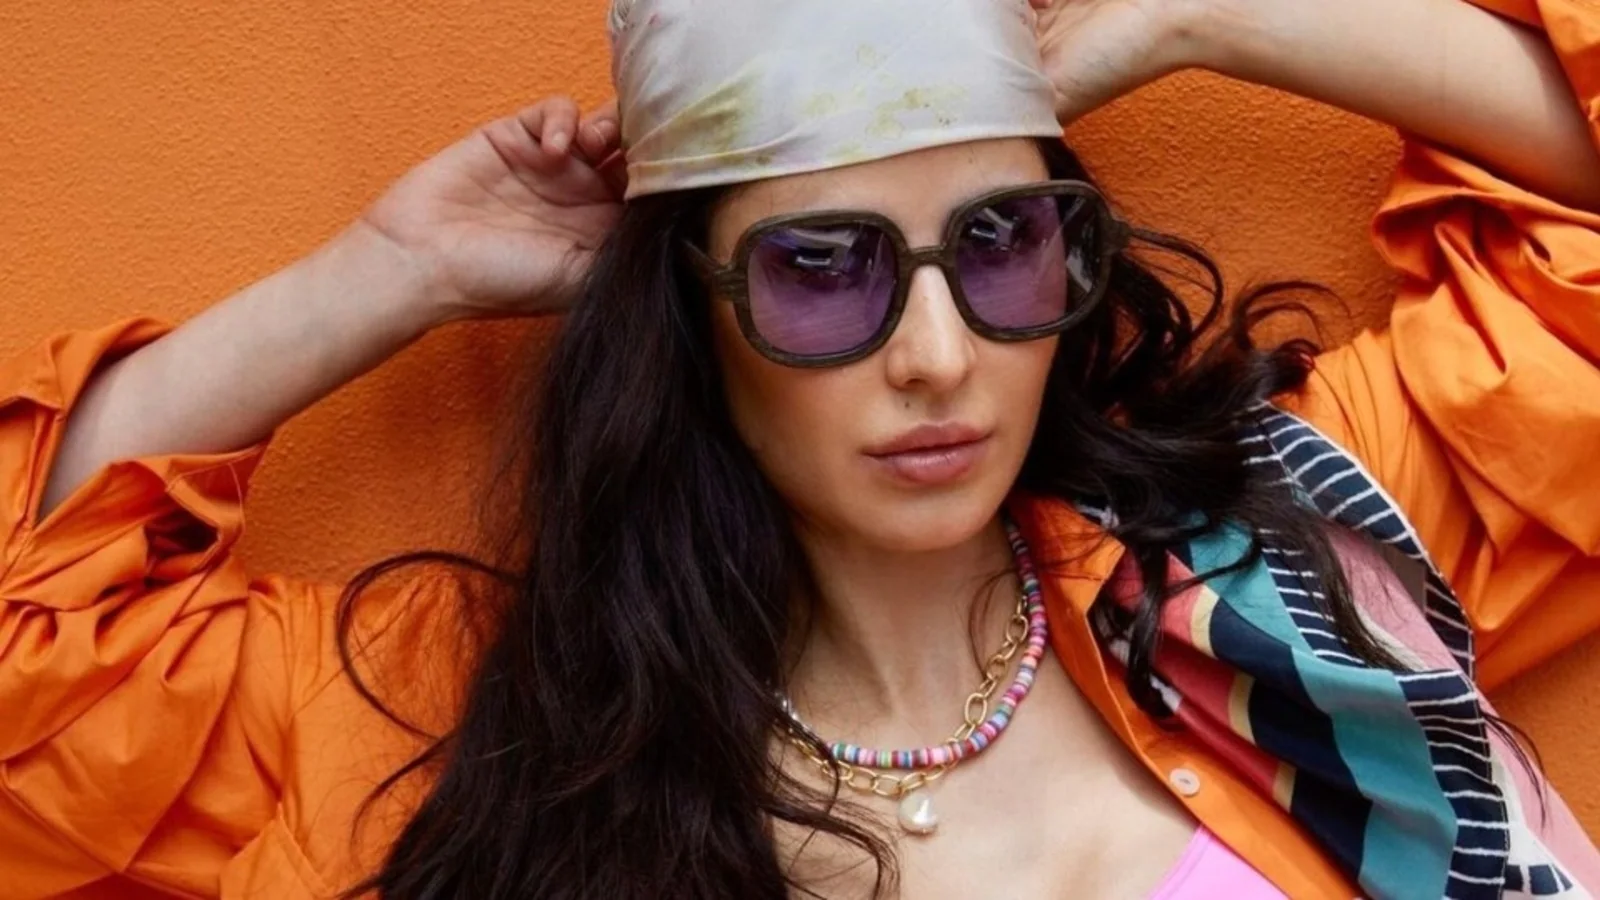 Katrina Kaif aces sizzling boho babe look in cropped tank top and bikini bottoms: Check out new pics